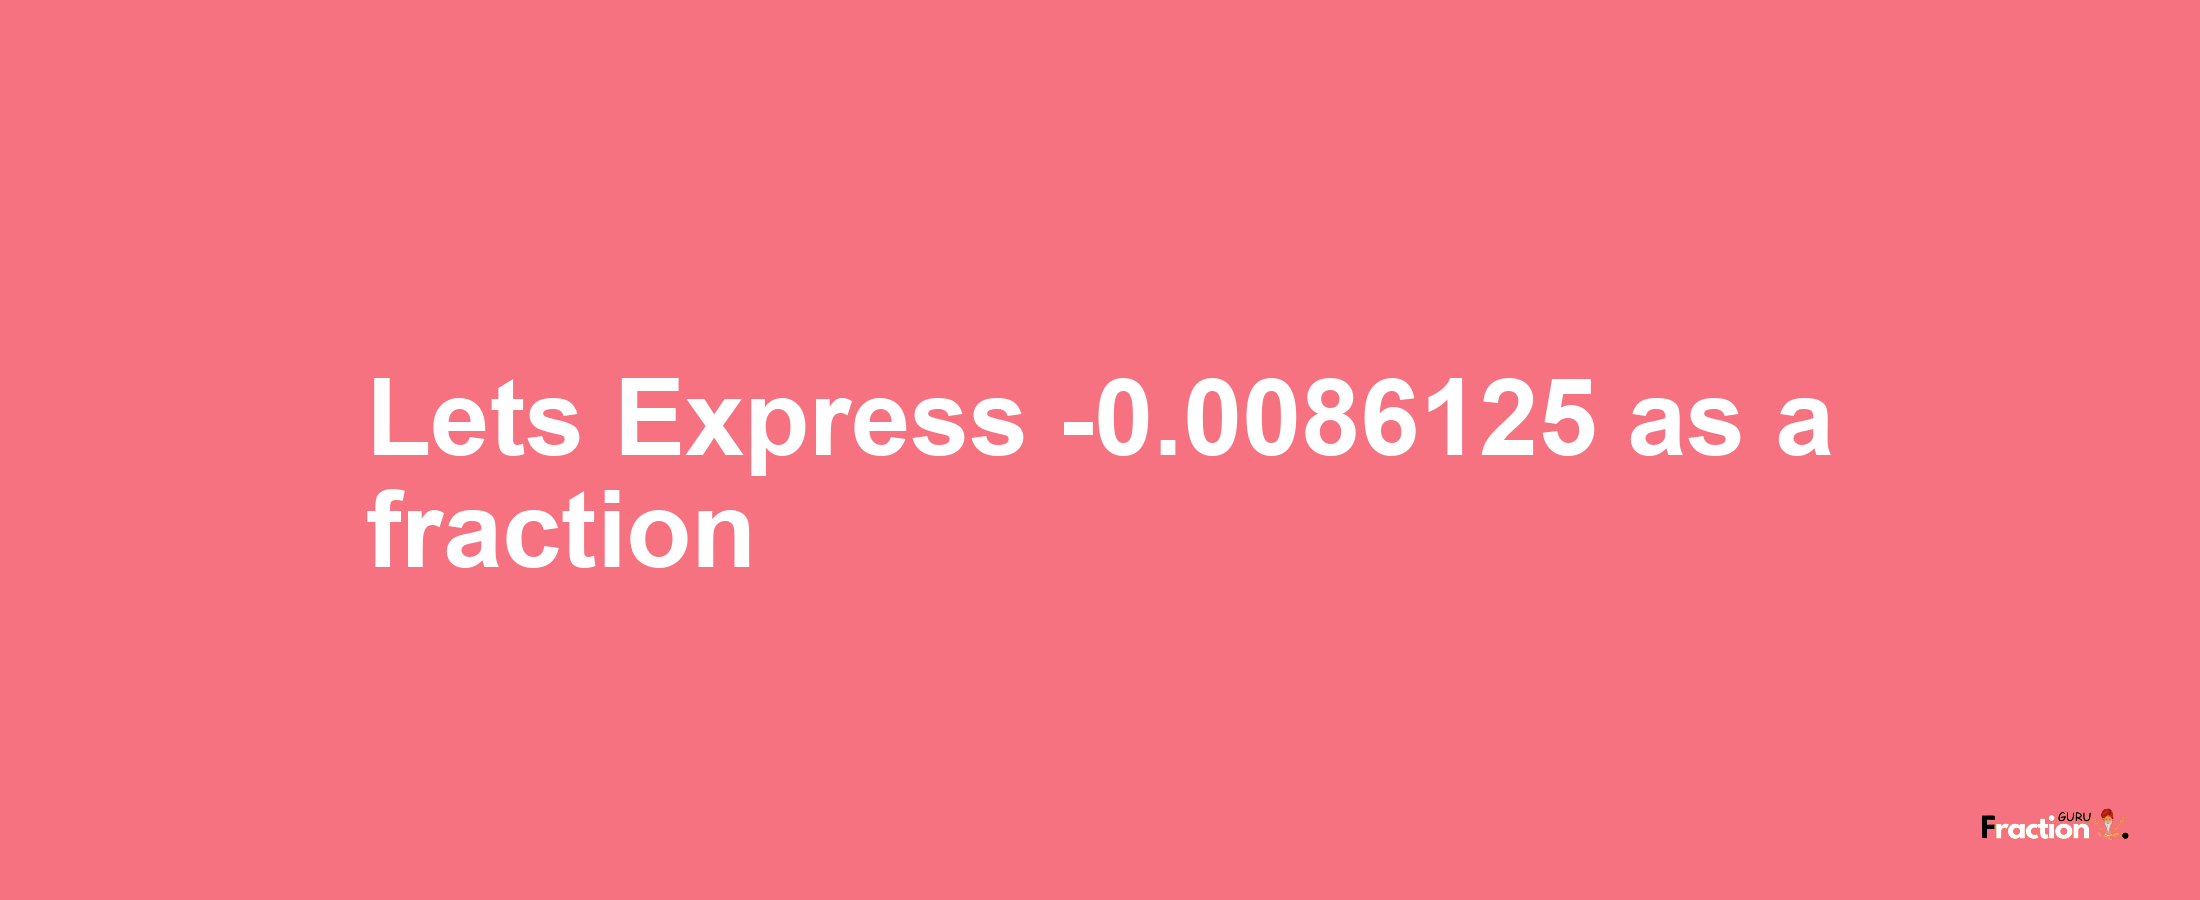 Lets Express -0.0086125 as afraction